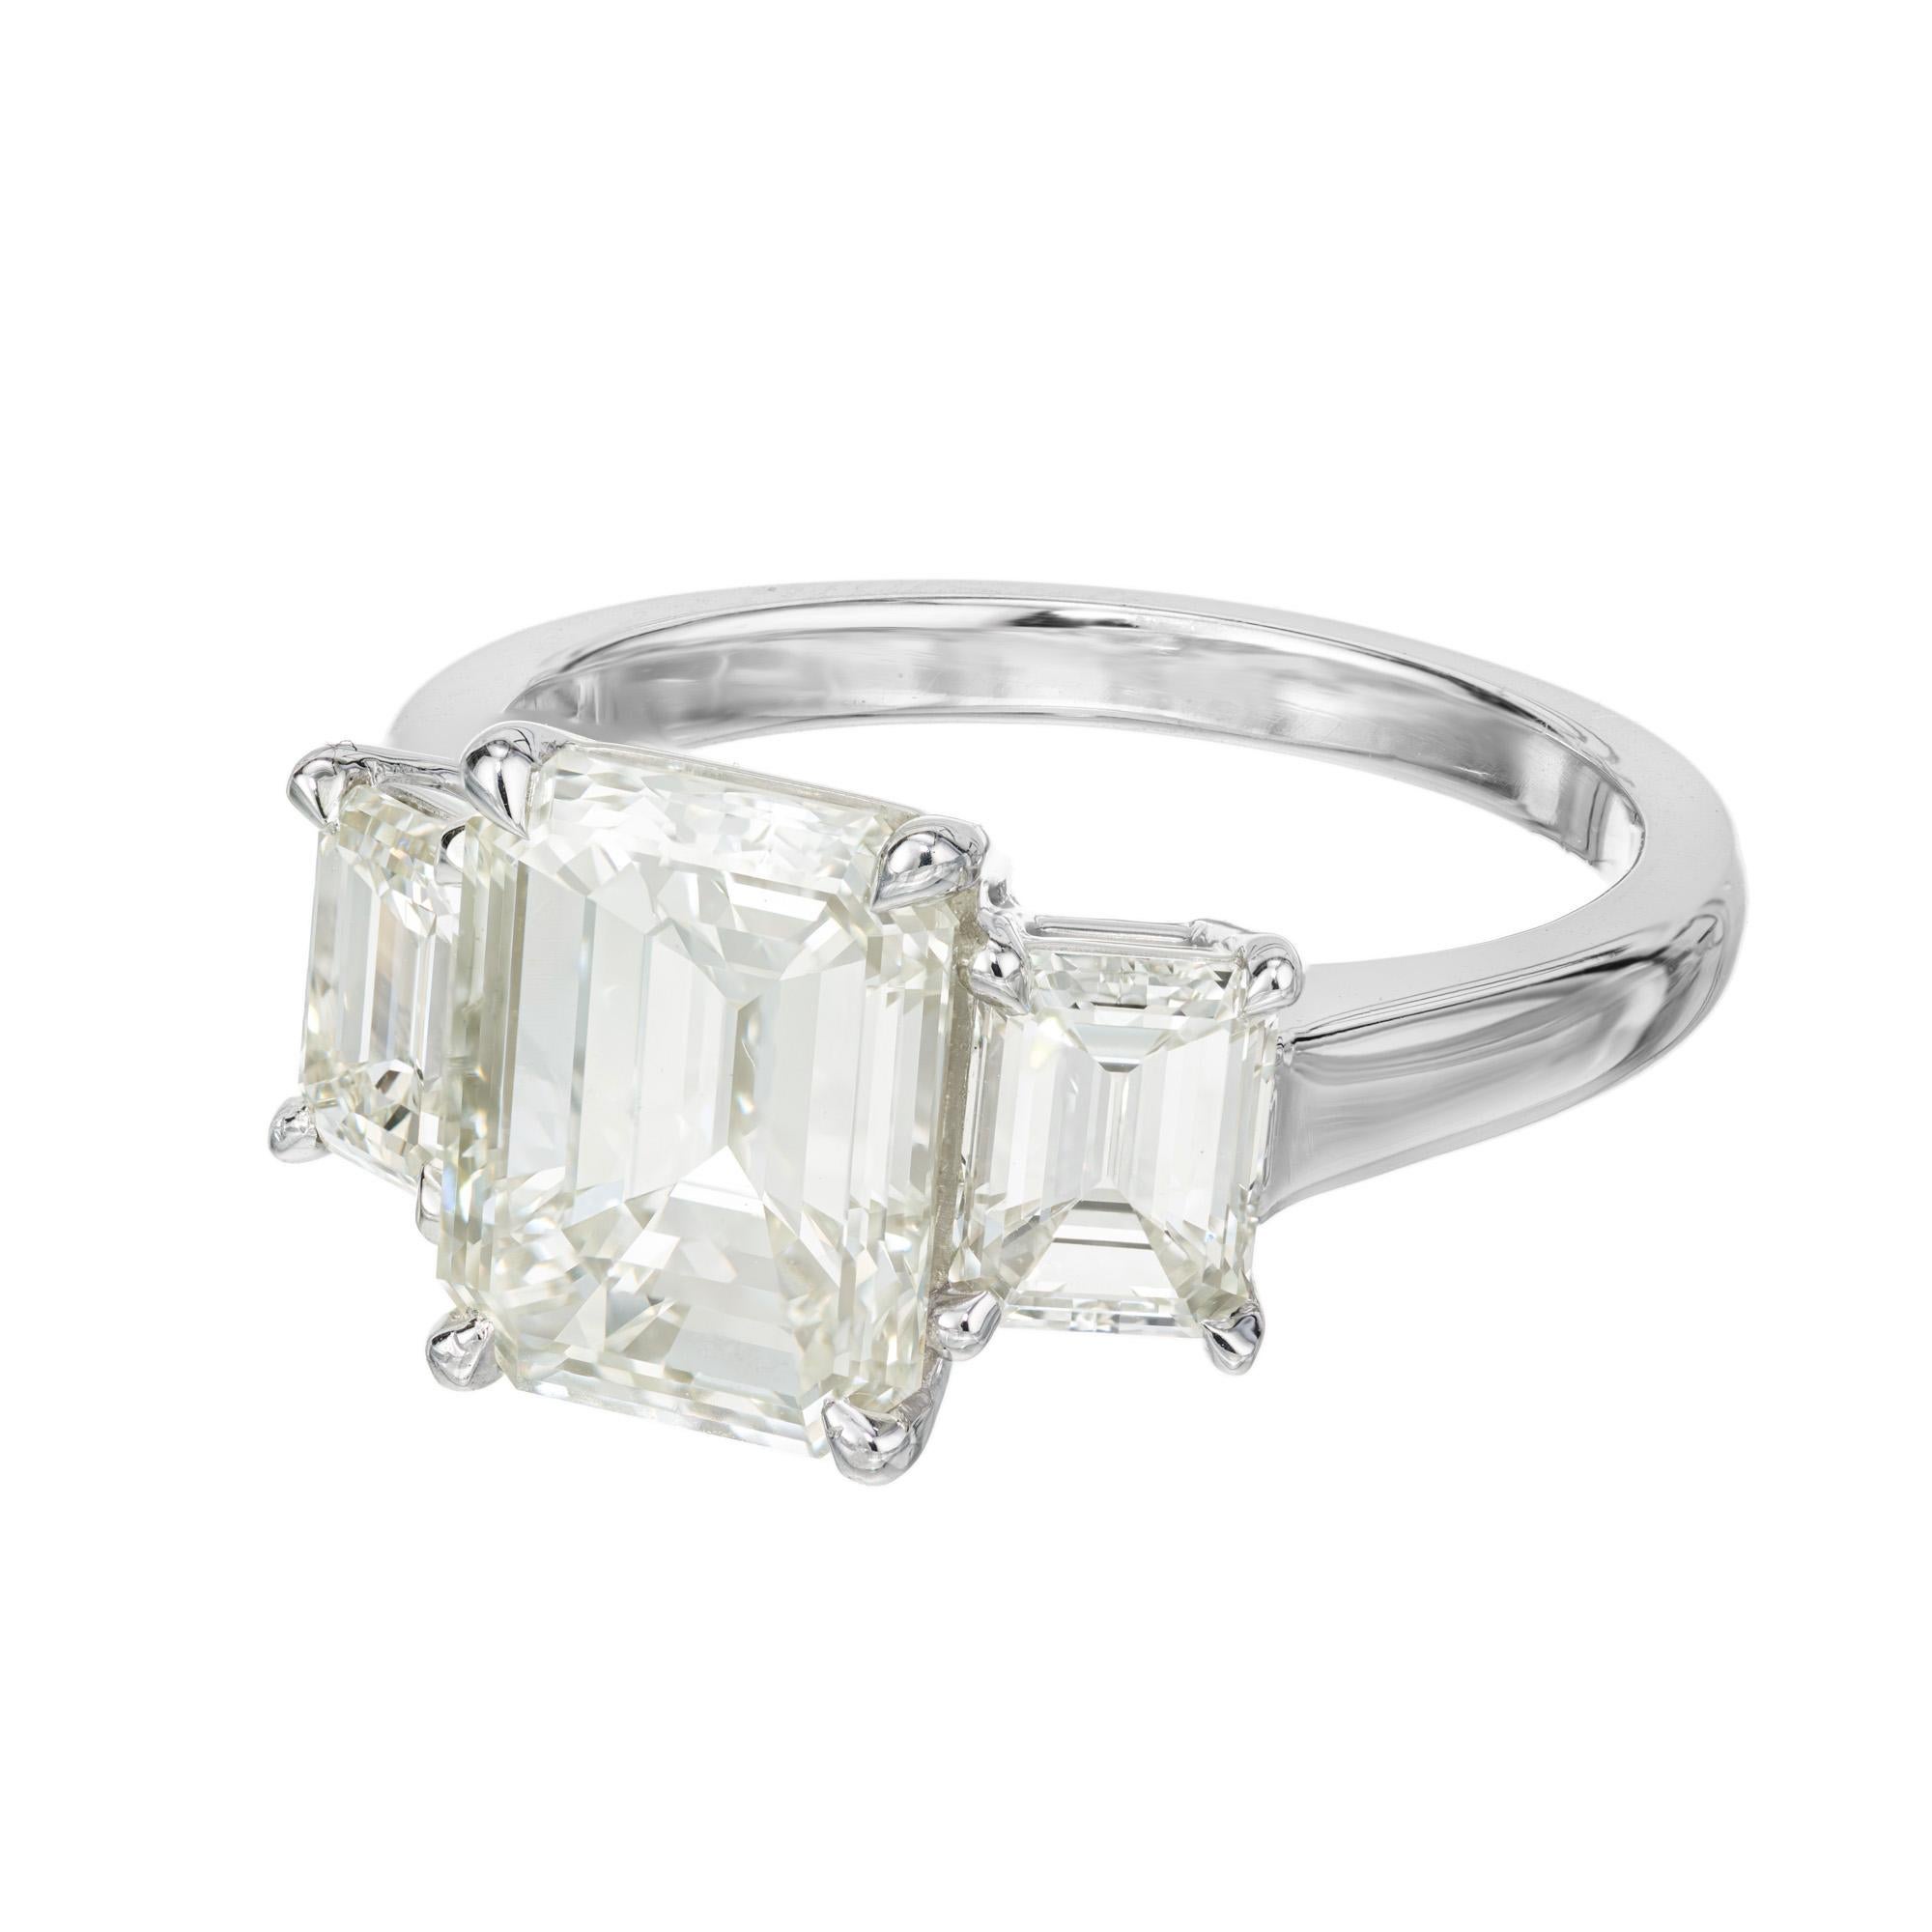 Classic three stone emerald cut diamond ring. 3.00ct emerald cut center stone mounted in a platinum setting accented with one .63ct and one .58ct. All three stones are independently GIA certified and excellent match for cut, color and clarity. They